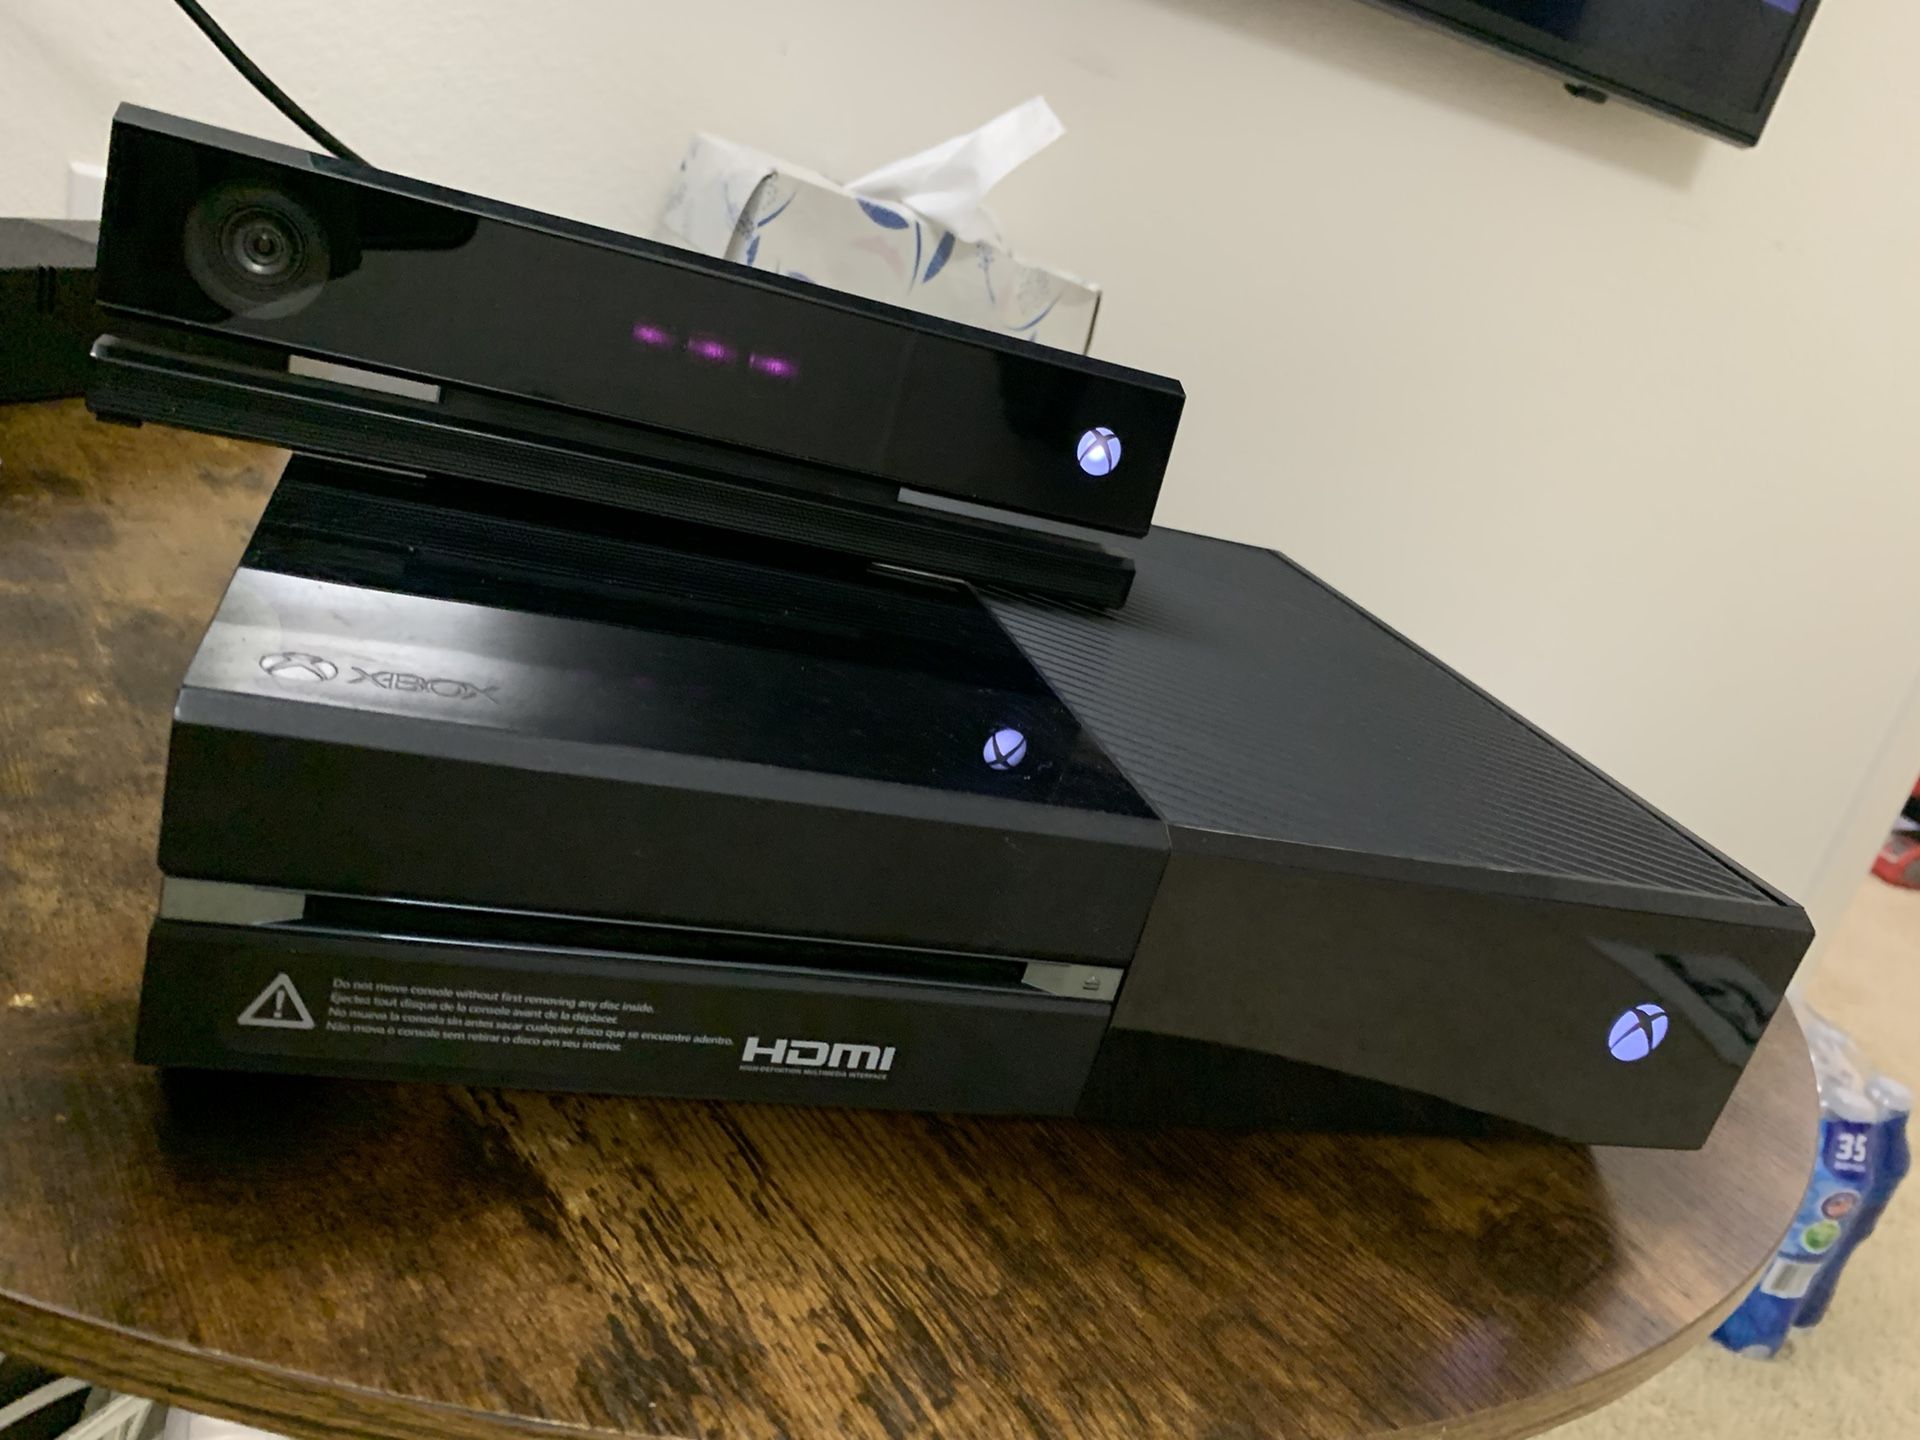 The Xbox One With kinect